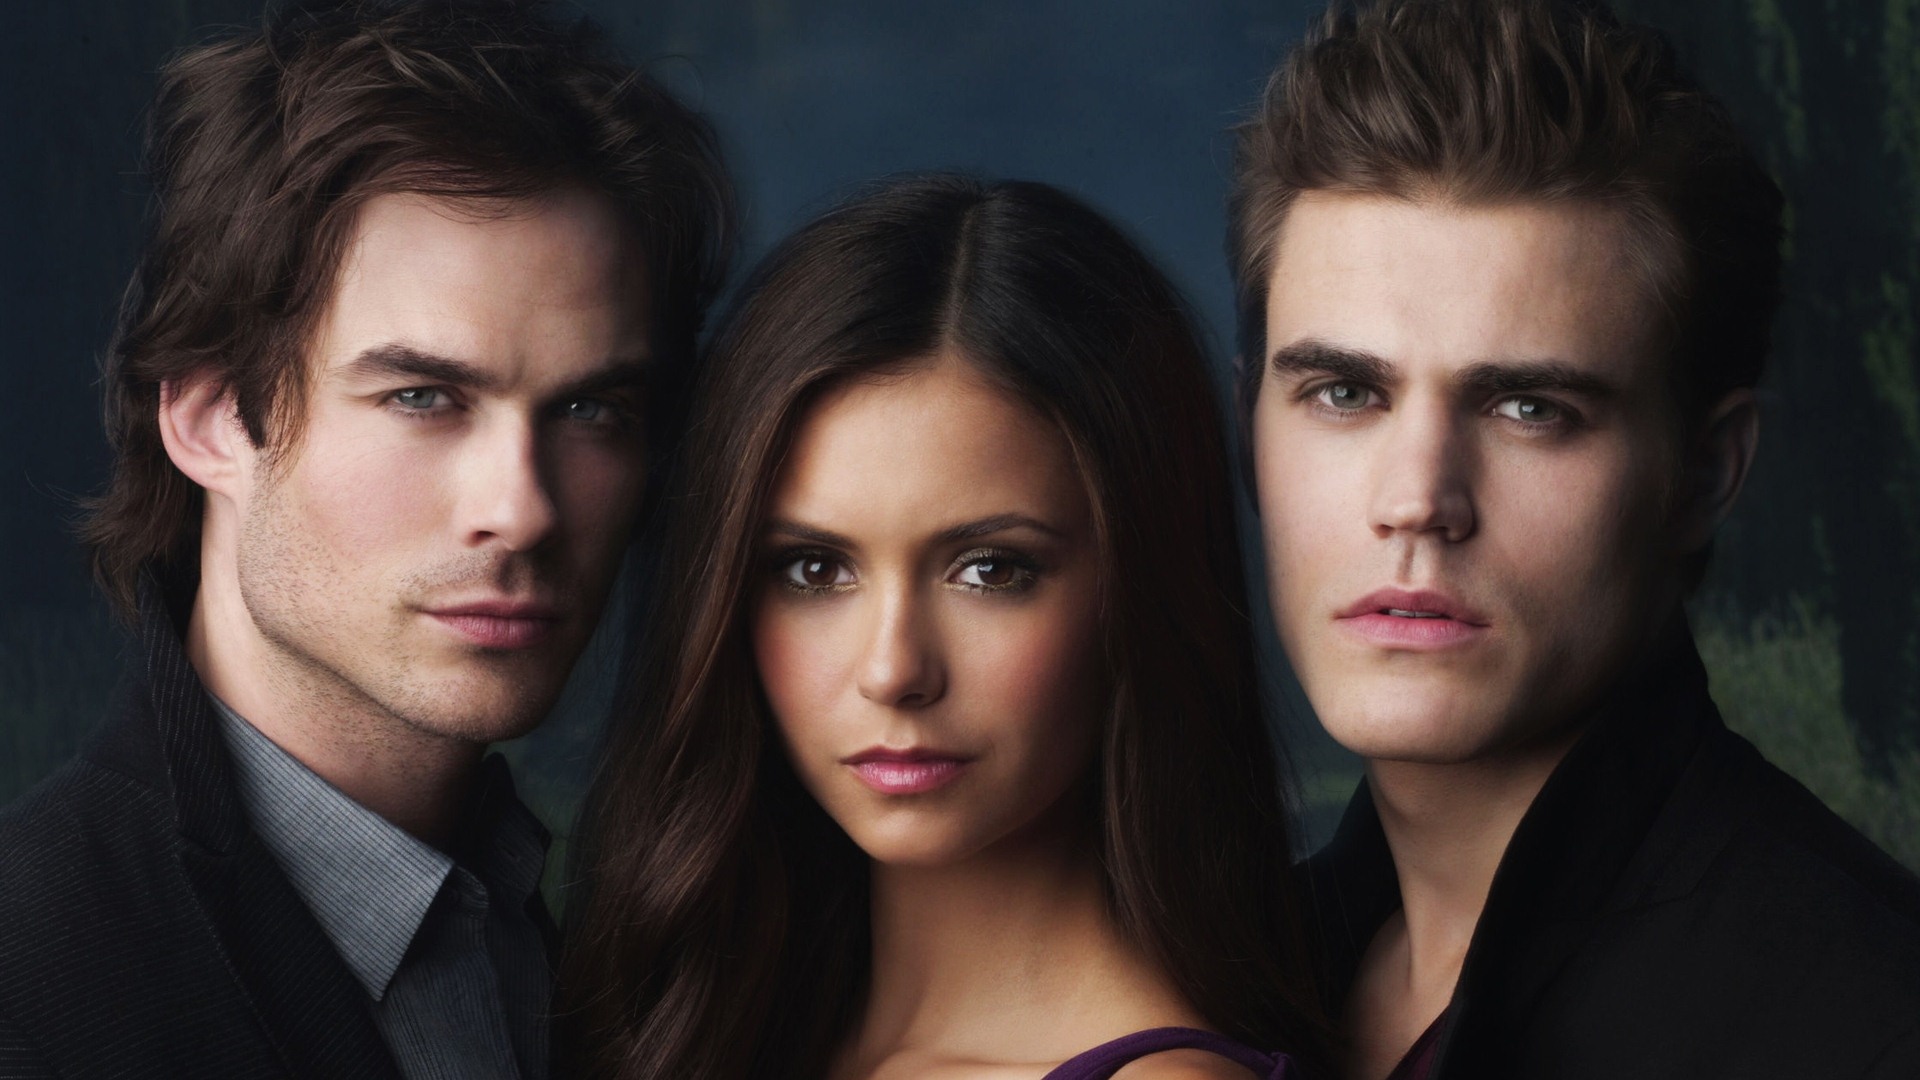 The Vampire Diaries HD Wallpapers #4 - 1920x1080